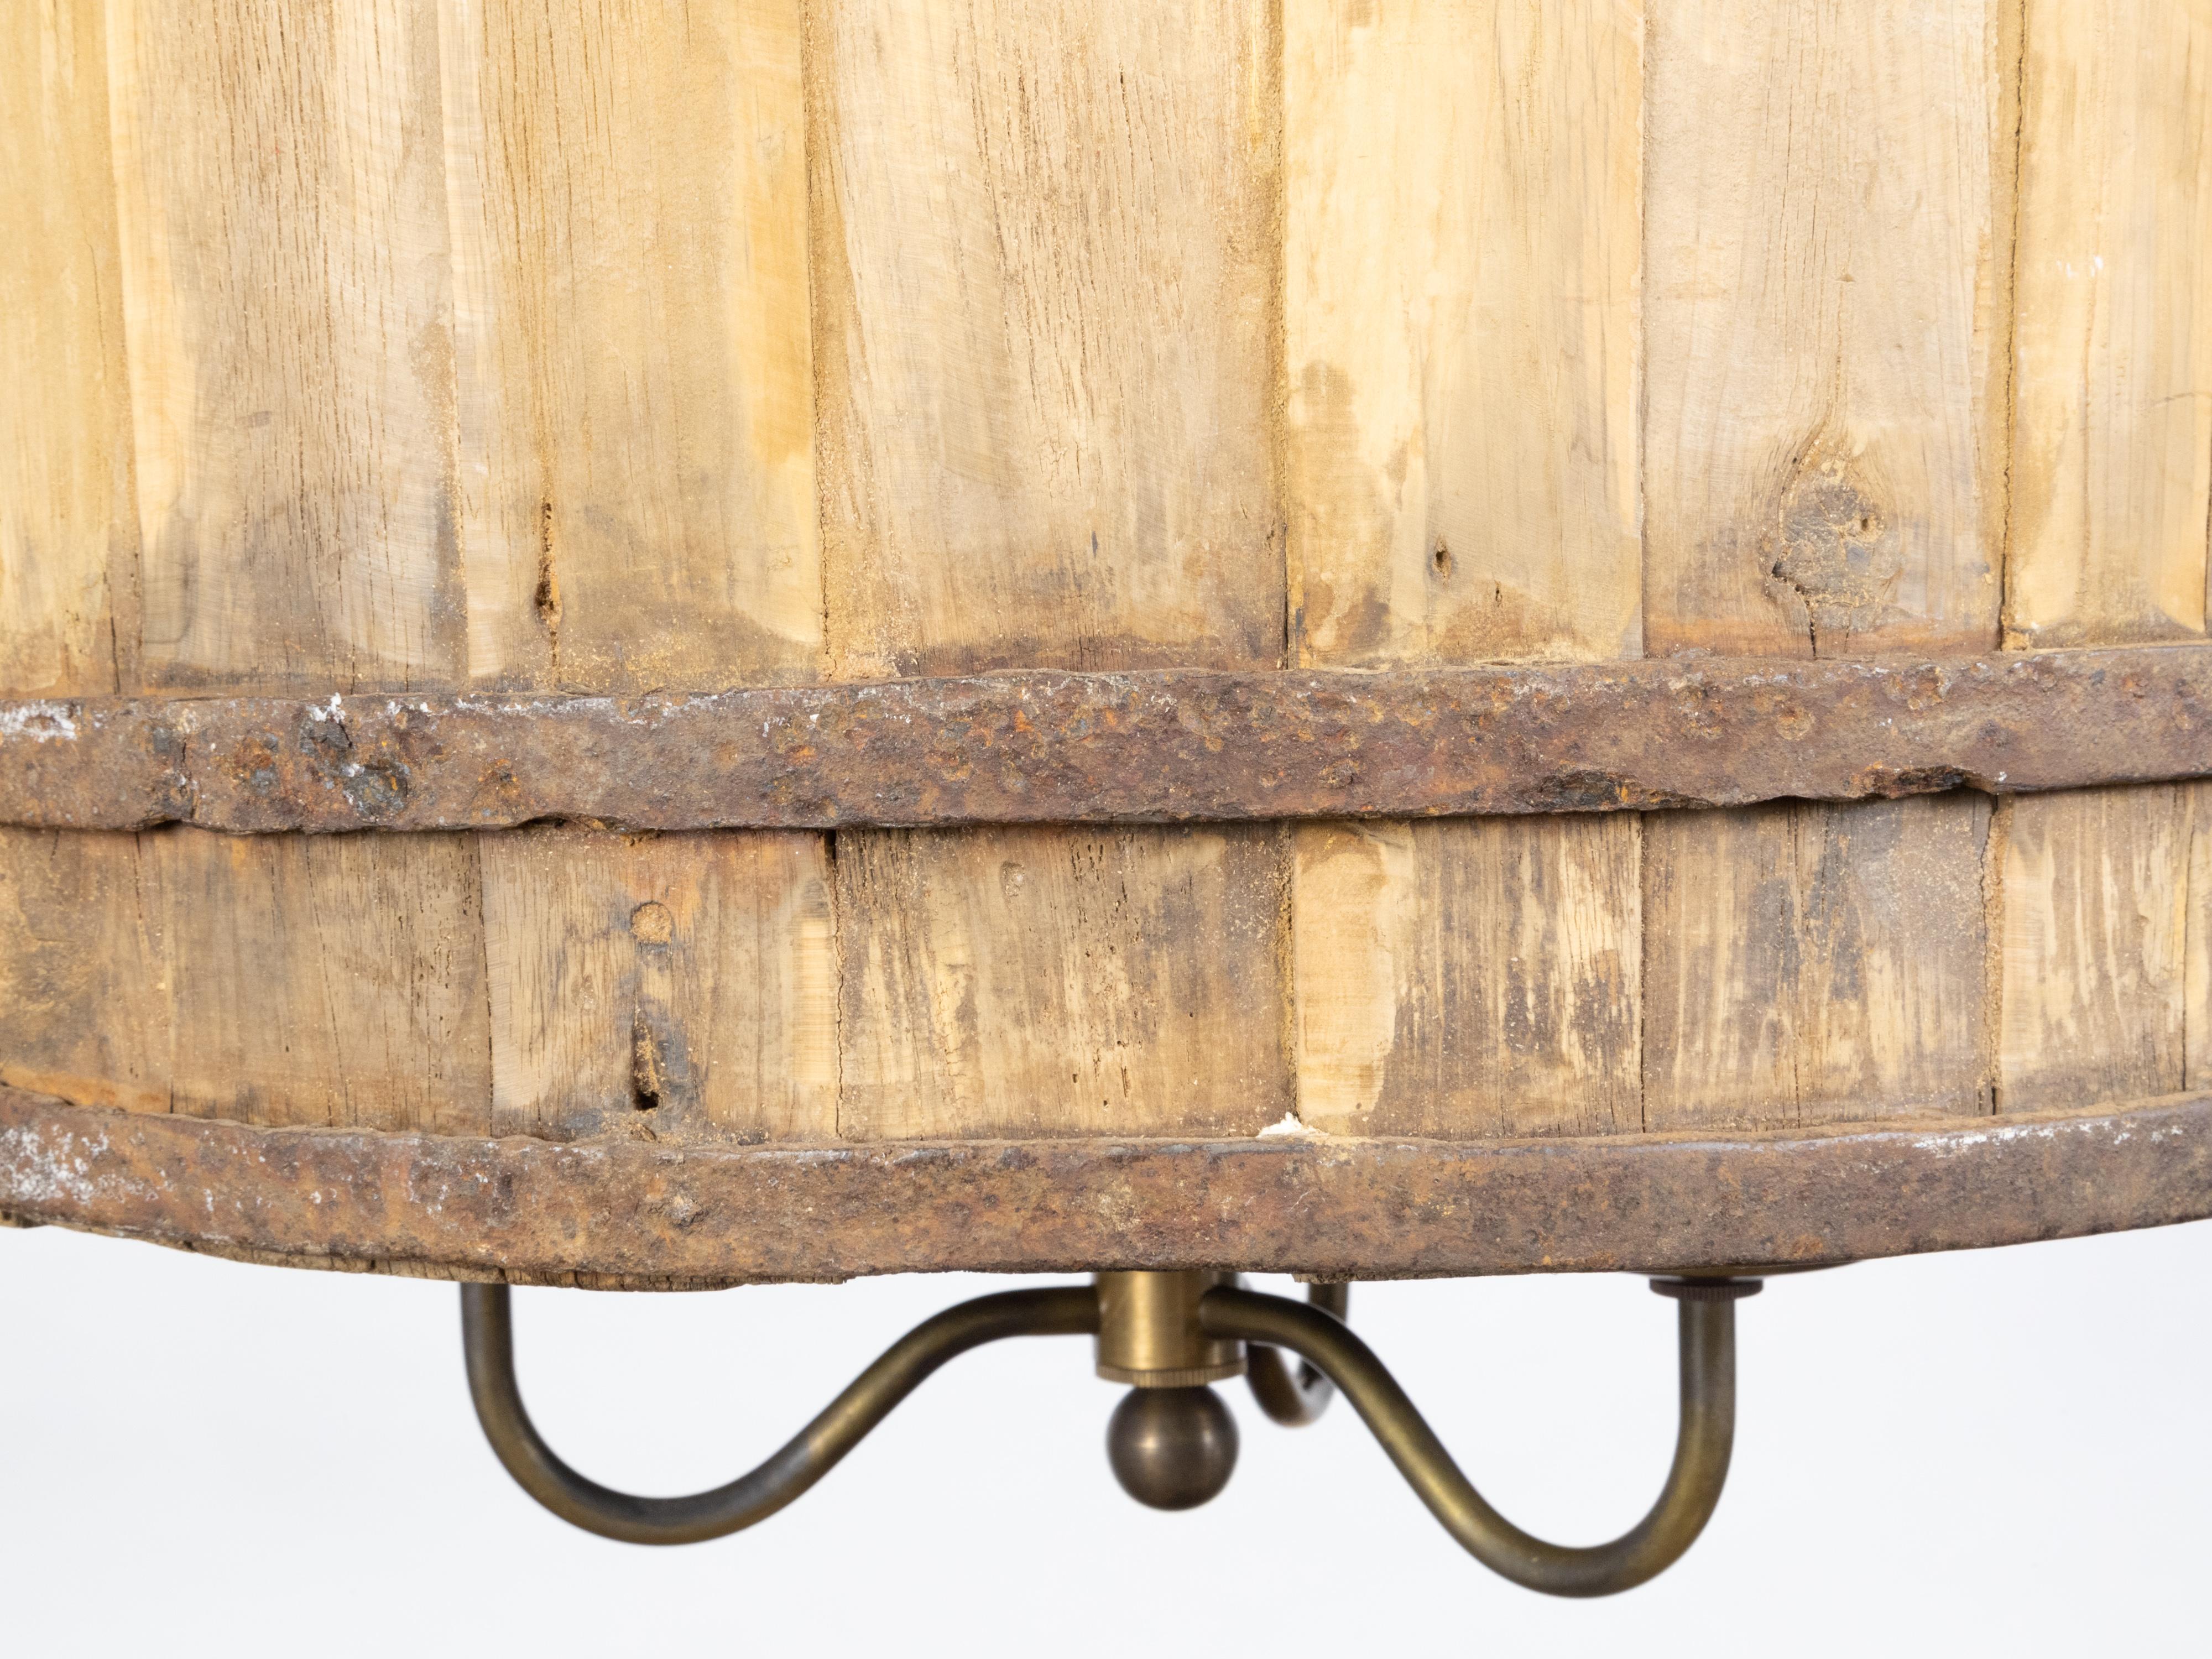 Rustic English Vintage Wooden Barrel Light Fixture with Three Scrolling Arms For Sale 4